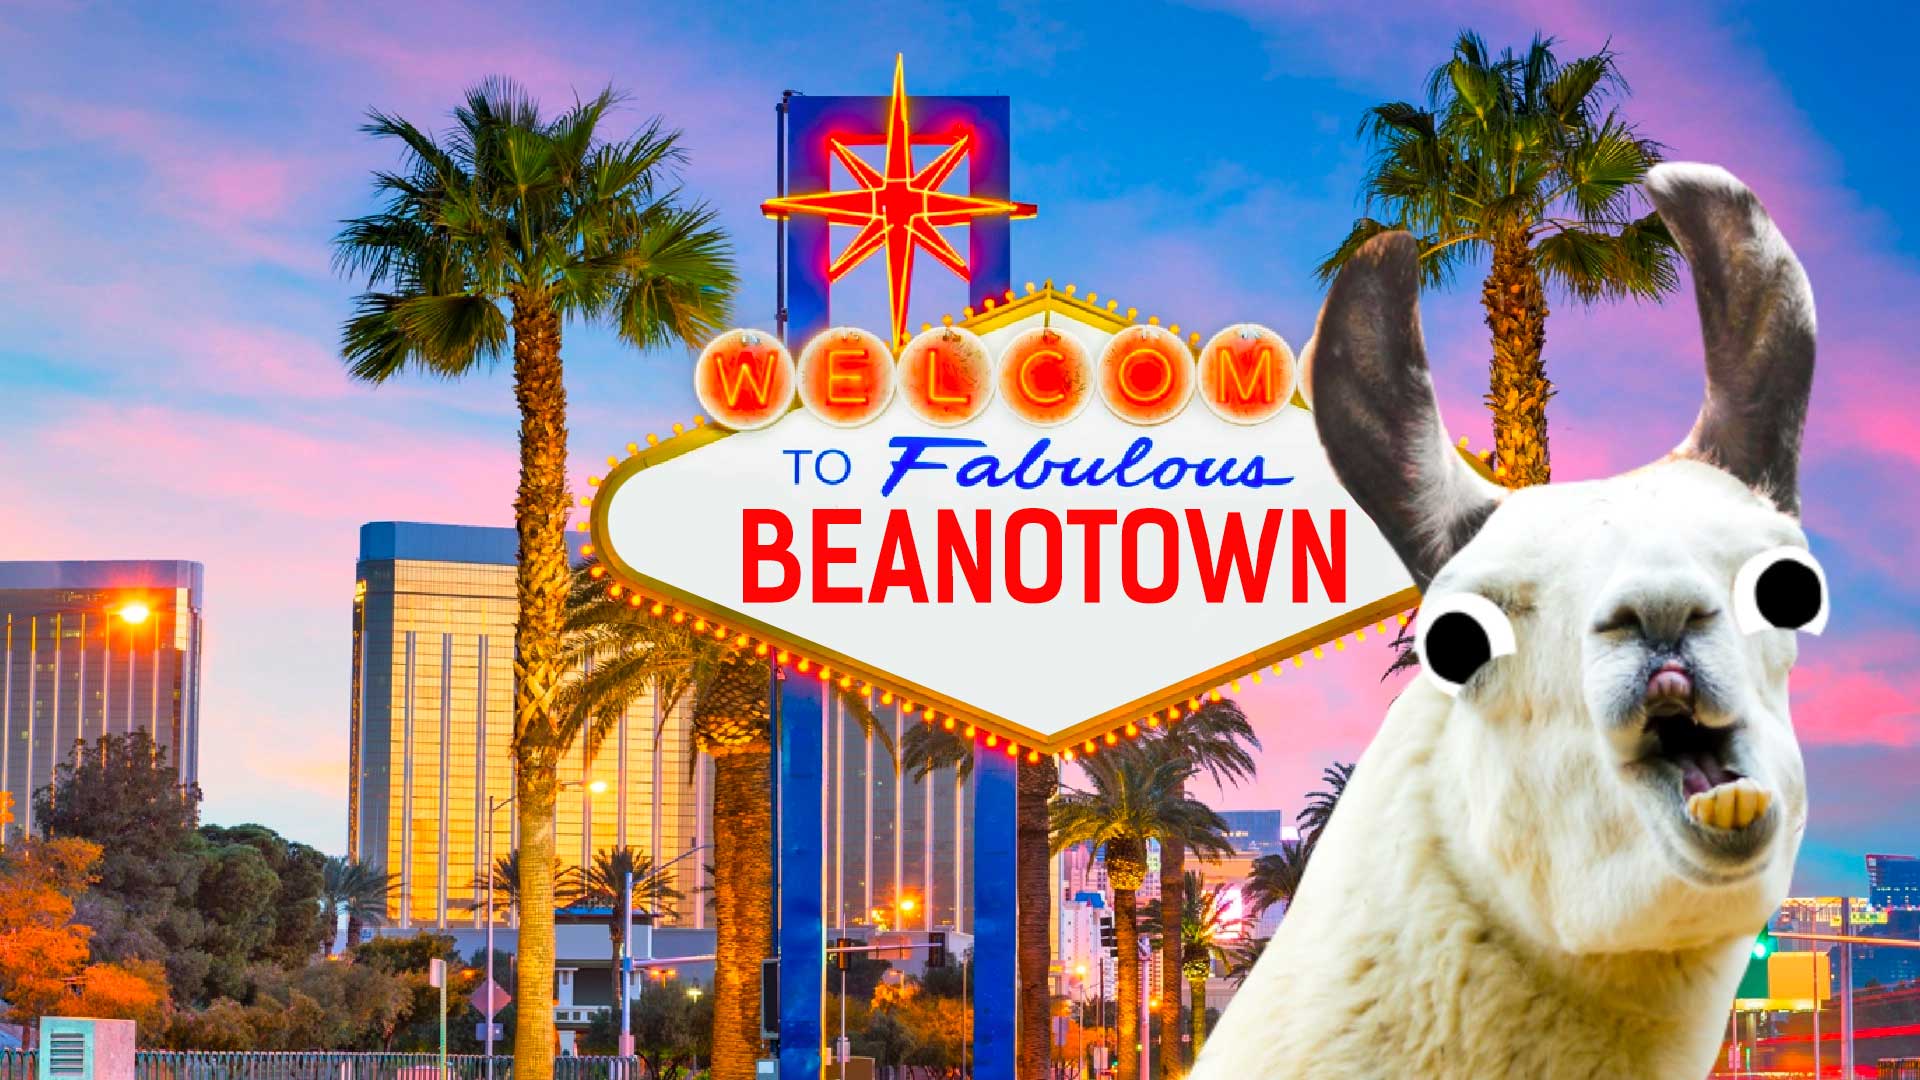 A sign saying Welcome to Fabulous Beanotown – with a llama in the front of the image